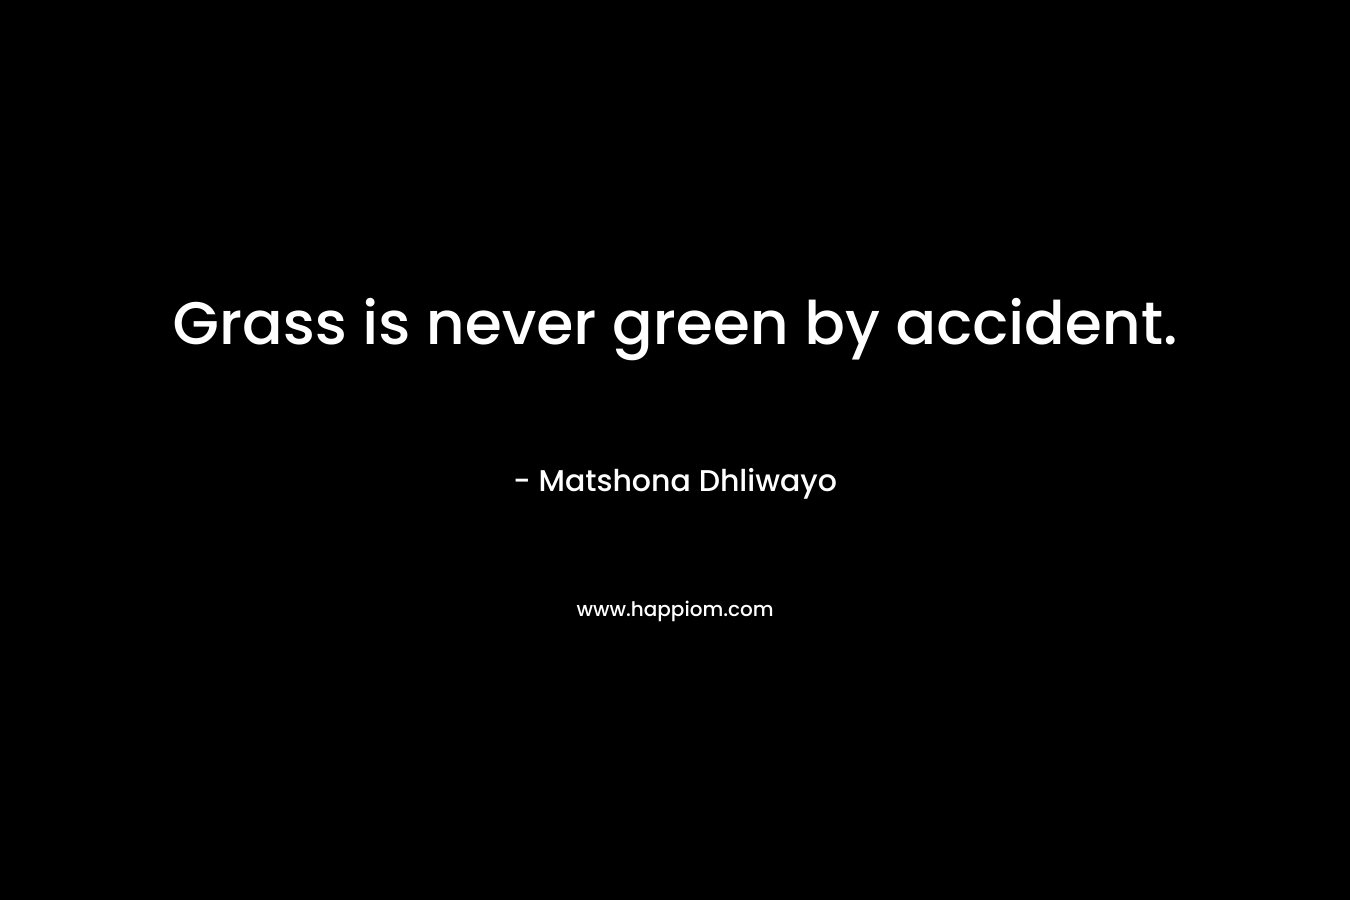 Grass is never green by accident. – Matshona Dhliwayo